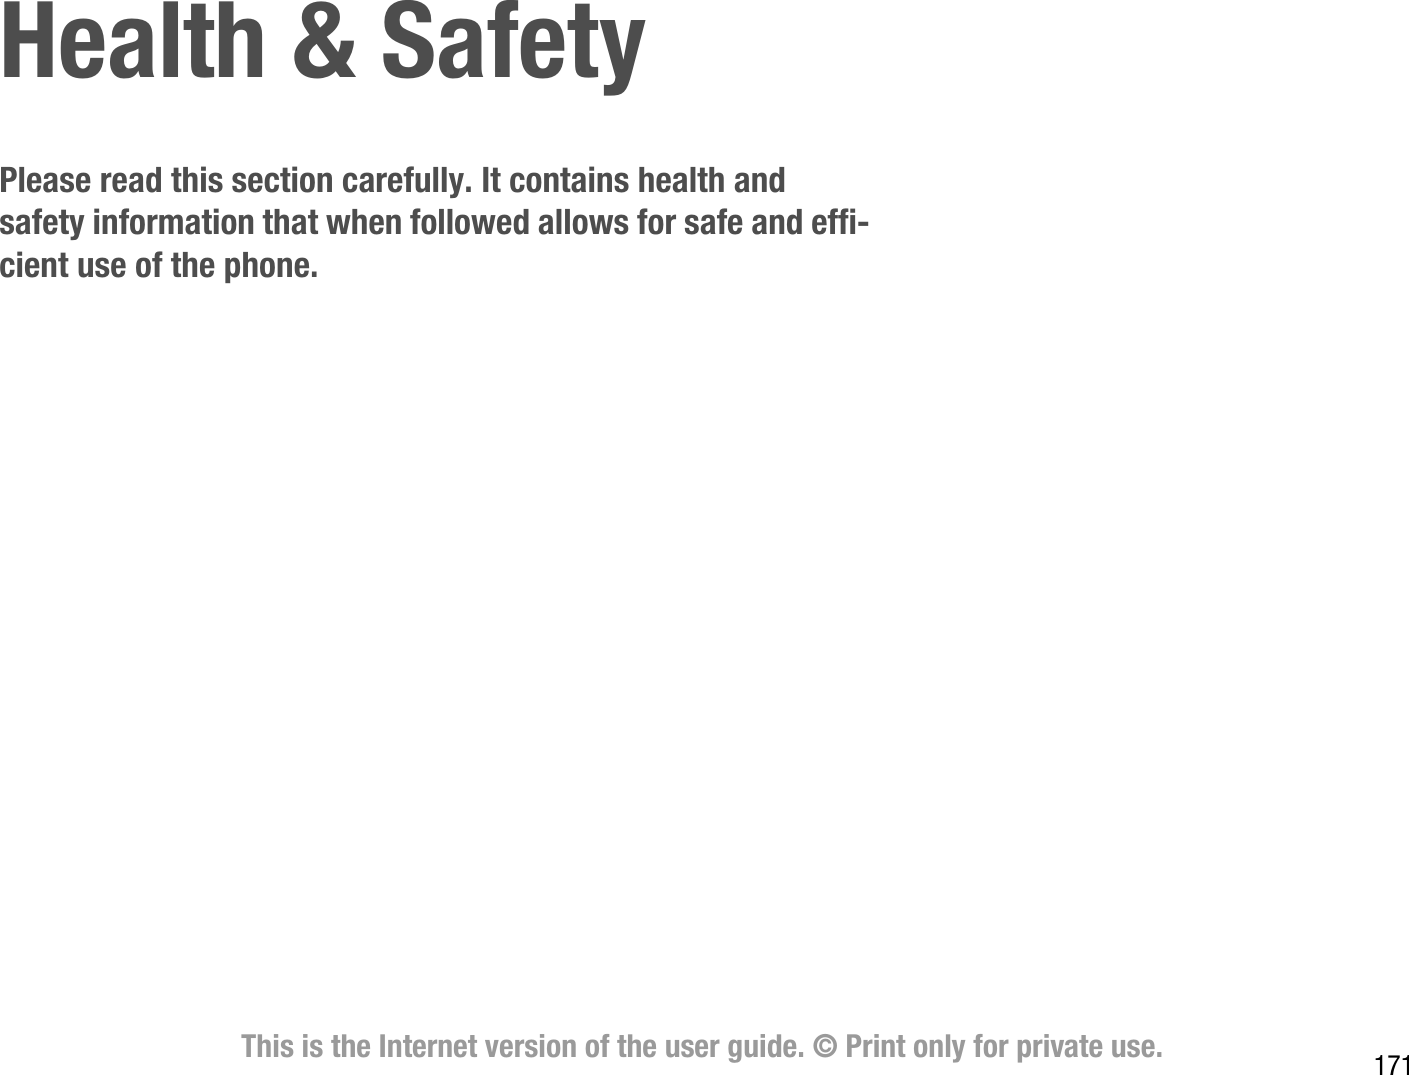 171This is the Internet version of the user guide. © Print only for private use.Health &amp; SafetyPlease read this section carefully. It contains health and safety information that when followed allows for safe and efficient use of the phone.